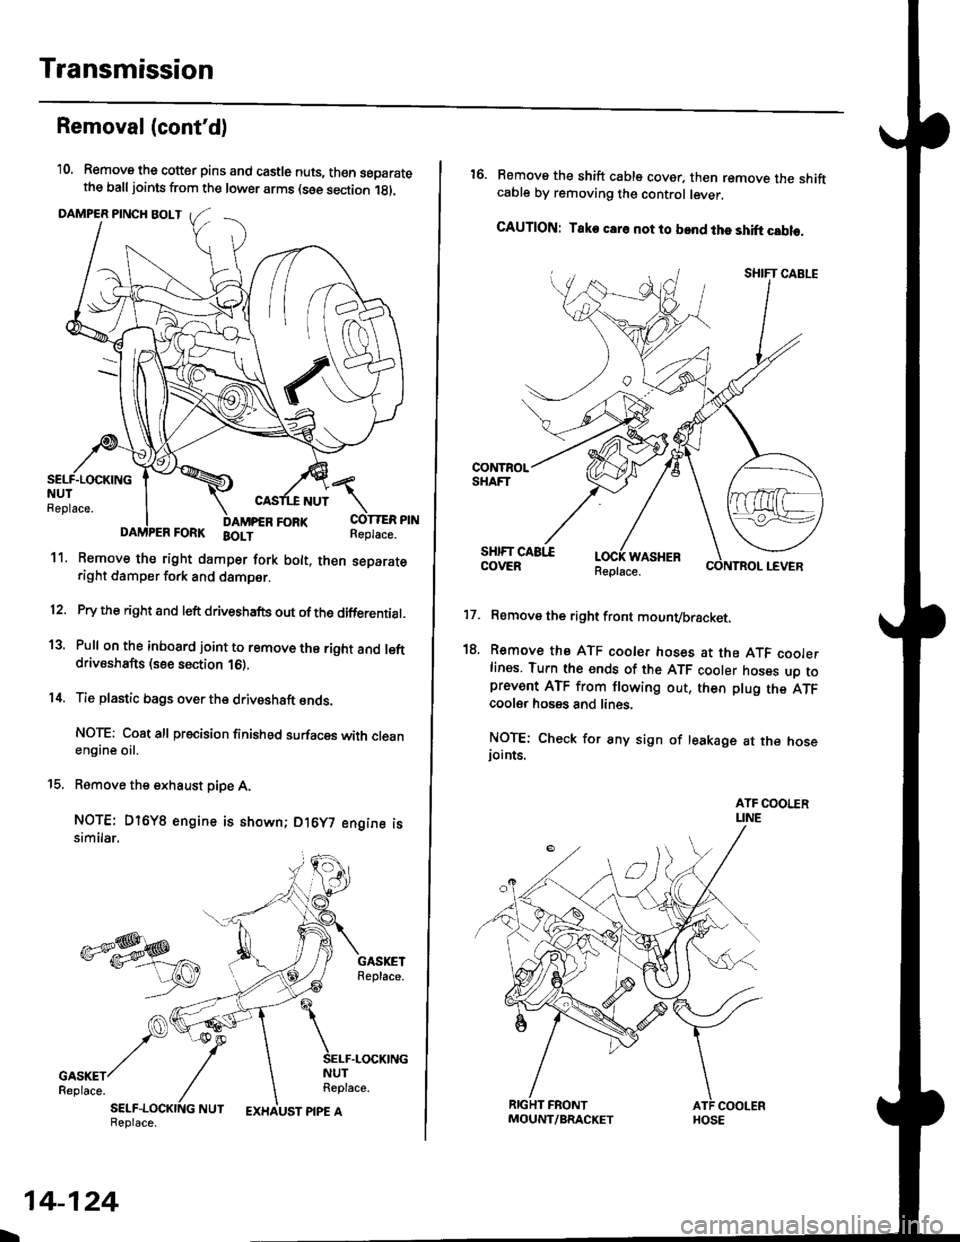 HONDA CIVIC 2000 6.G Owners Manual Transmission
Removal(contd)
10. Remove the cotter pins and castle nuts, th€n separatethe balljoints from the lower arms (see section 1gl.
DAMPER PINCH BOLT
NUT
FORI(FORK BOLT
11. Remove the right 